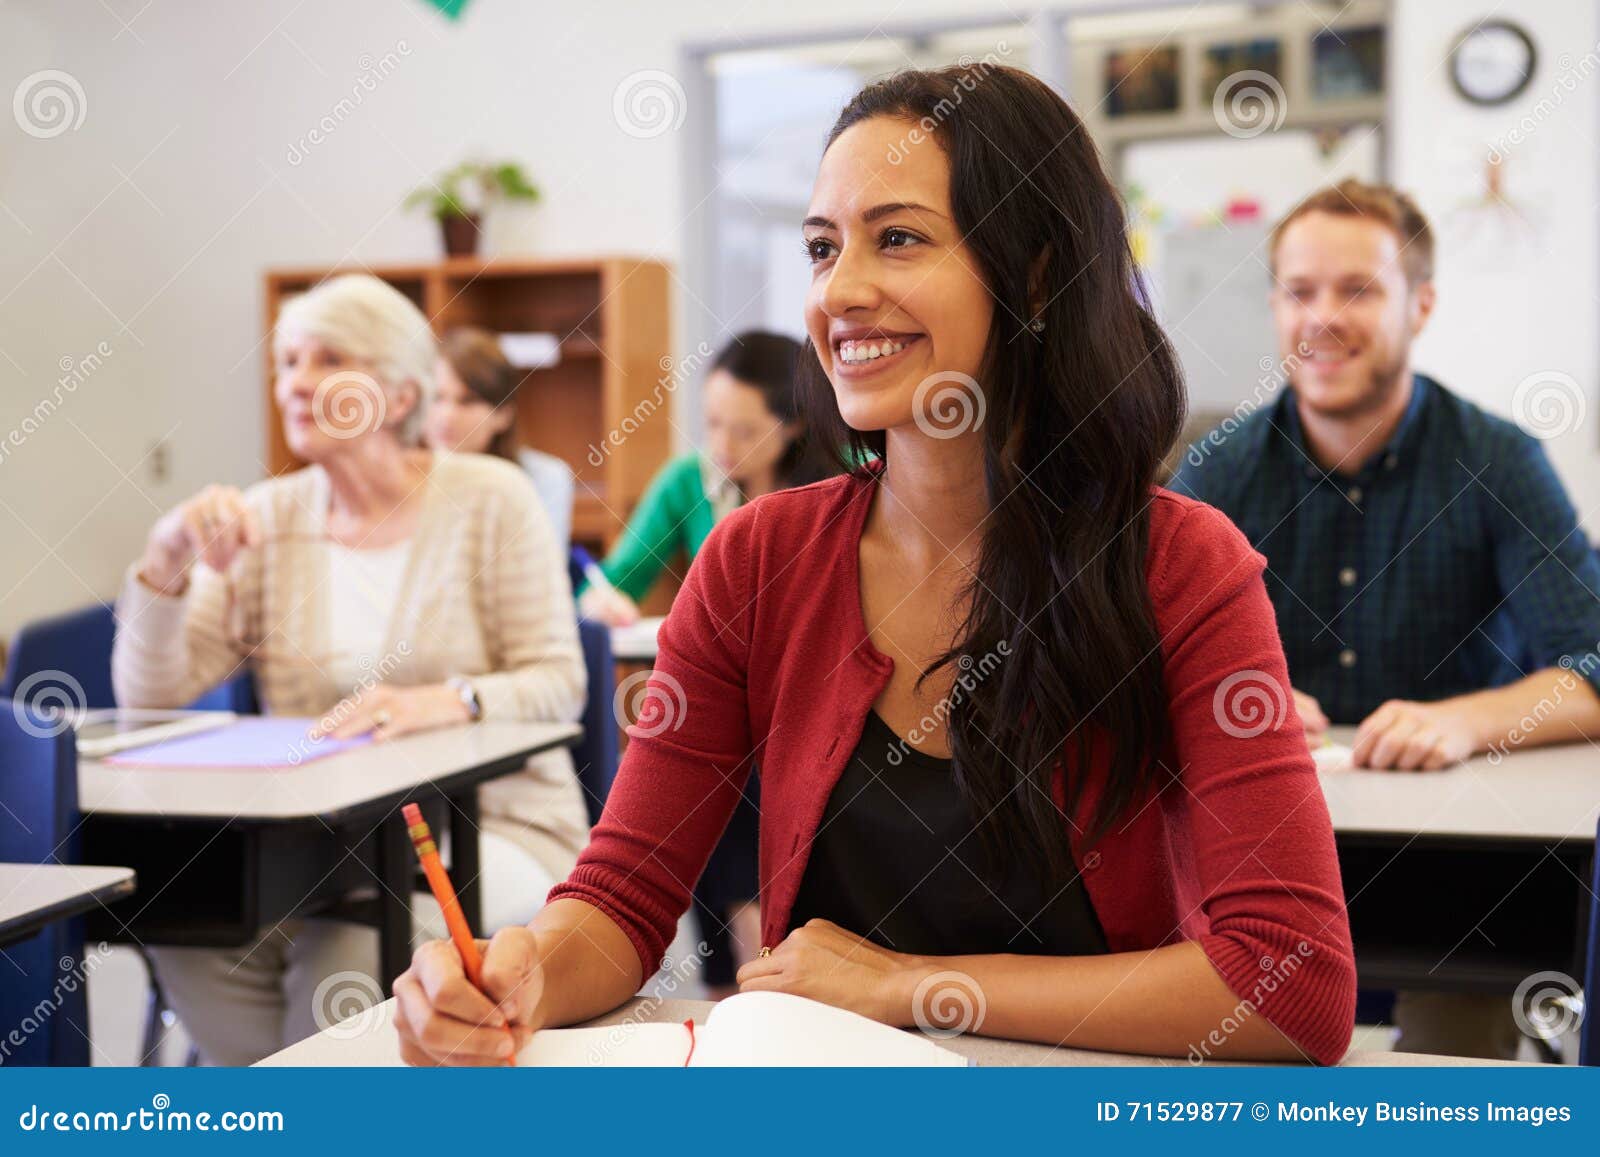 hispanic woman studying at adult education class looking up